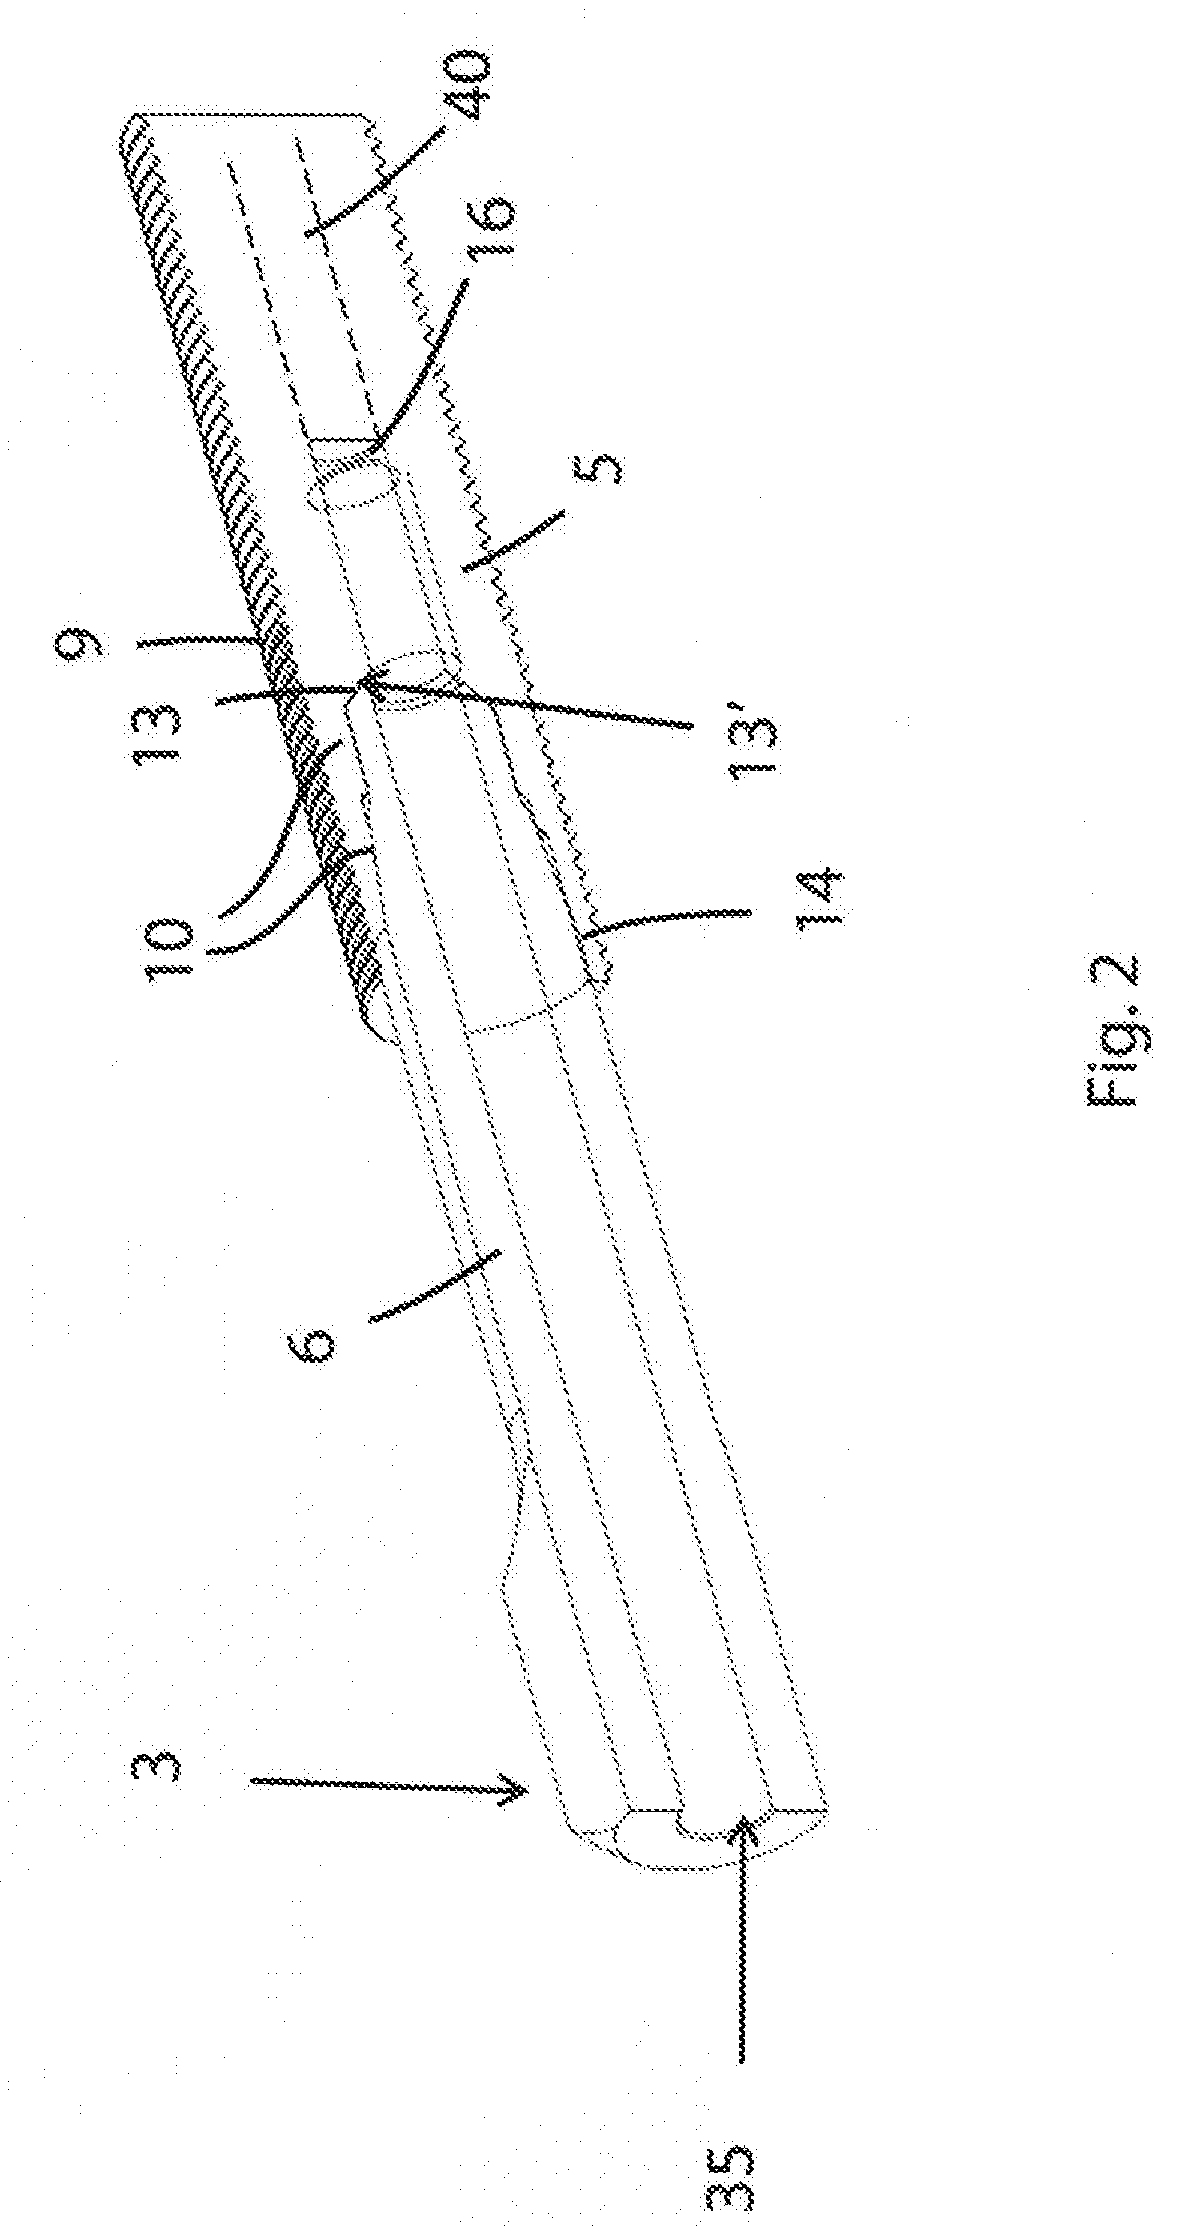 Anchoring system for attaching a prosthesis to a human body